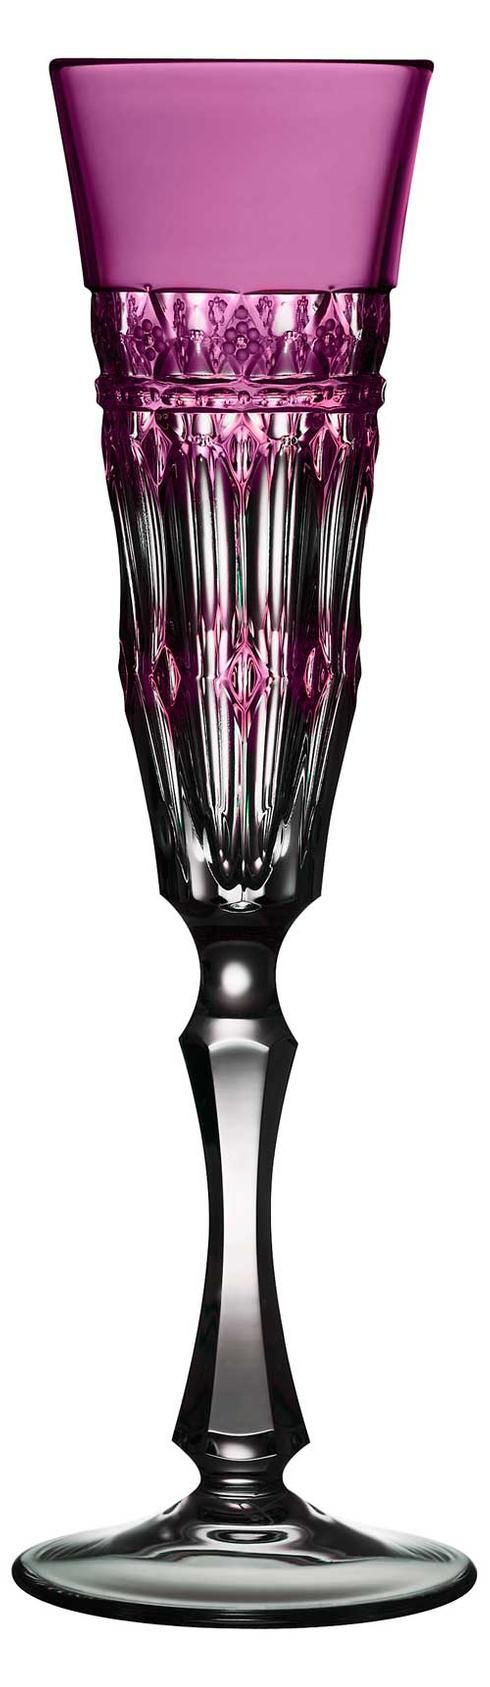 13 Lovely Waterford Lismore Thistle Vase 2024 free download waterford lismore thistle vase of 38 best feeling the elegance images on pinterest glass glass art regarding frivolous fabulous beautiful colorful crystal flutes for the home